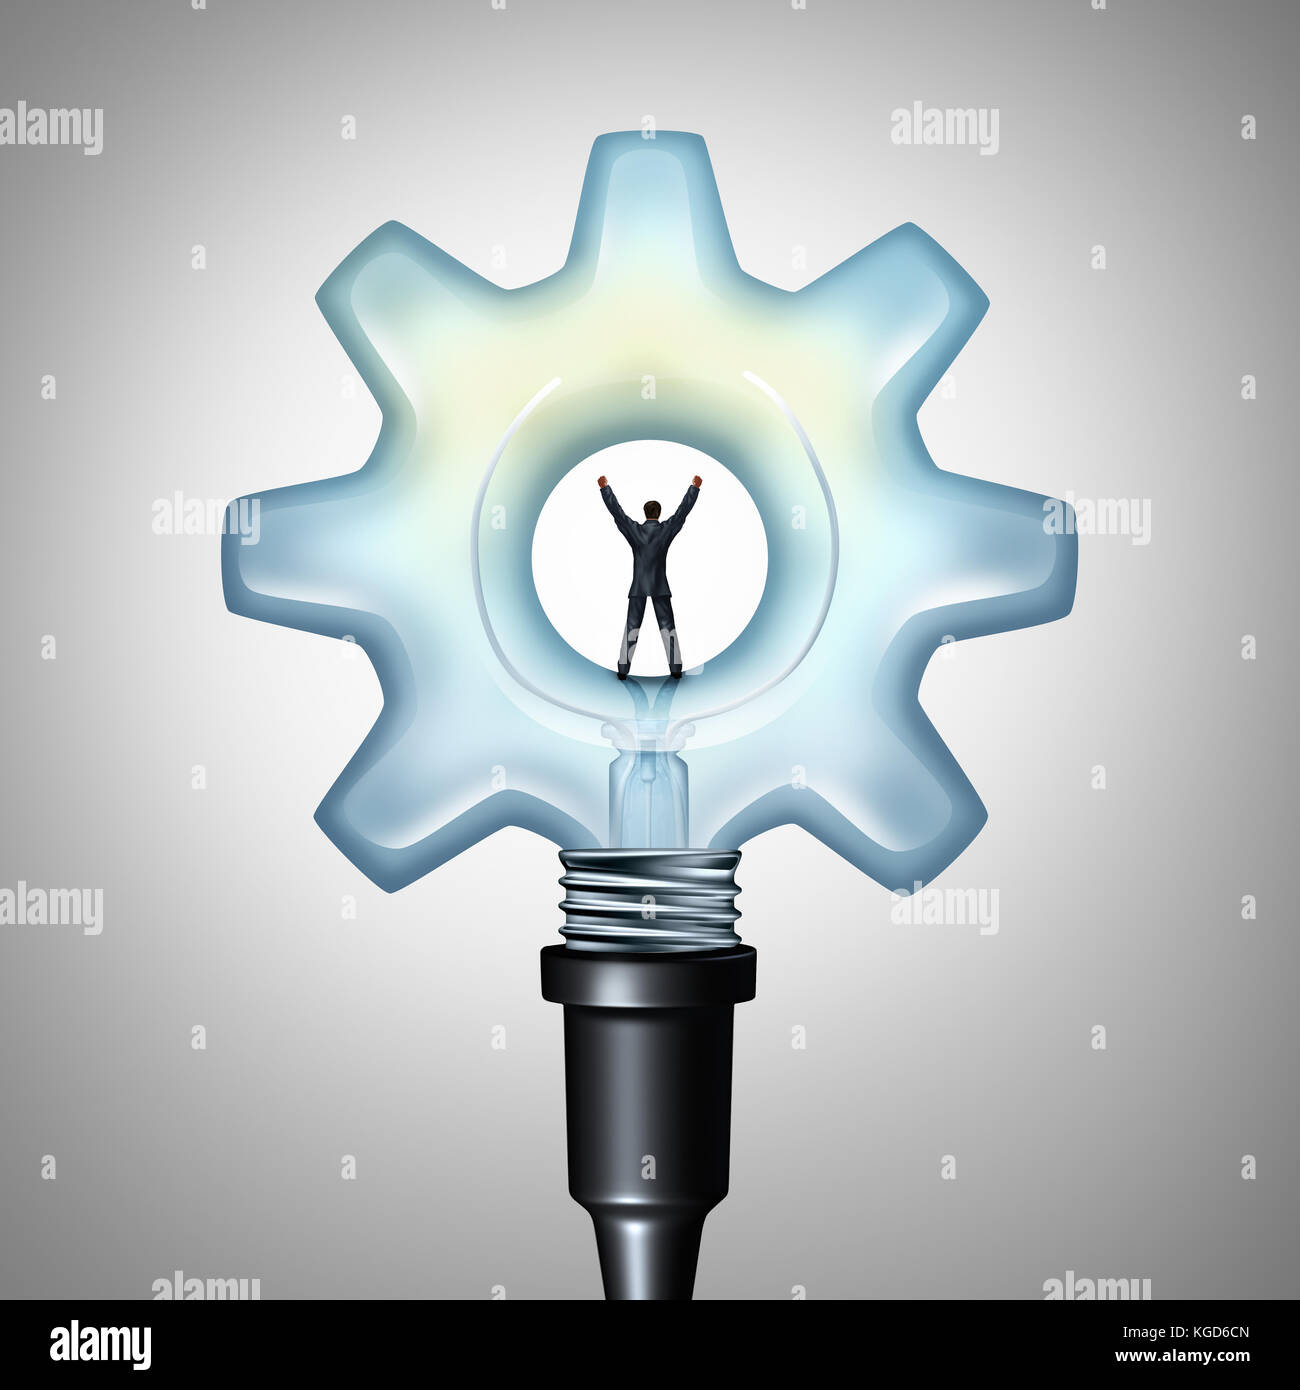 Business creative energy and bright industry idea concept as a businessman standing on a light bulb shaped as a machine gear. Stock Photo